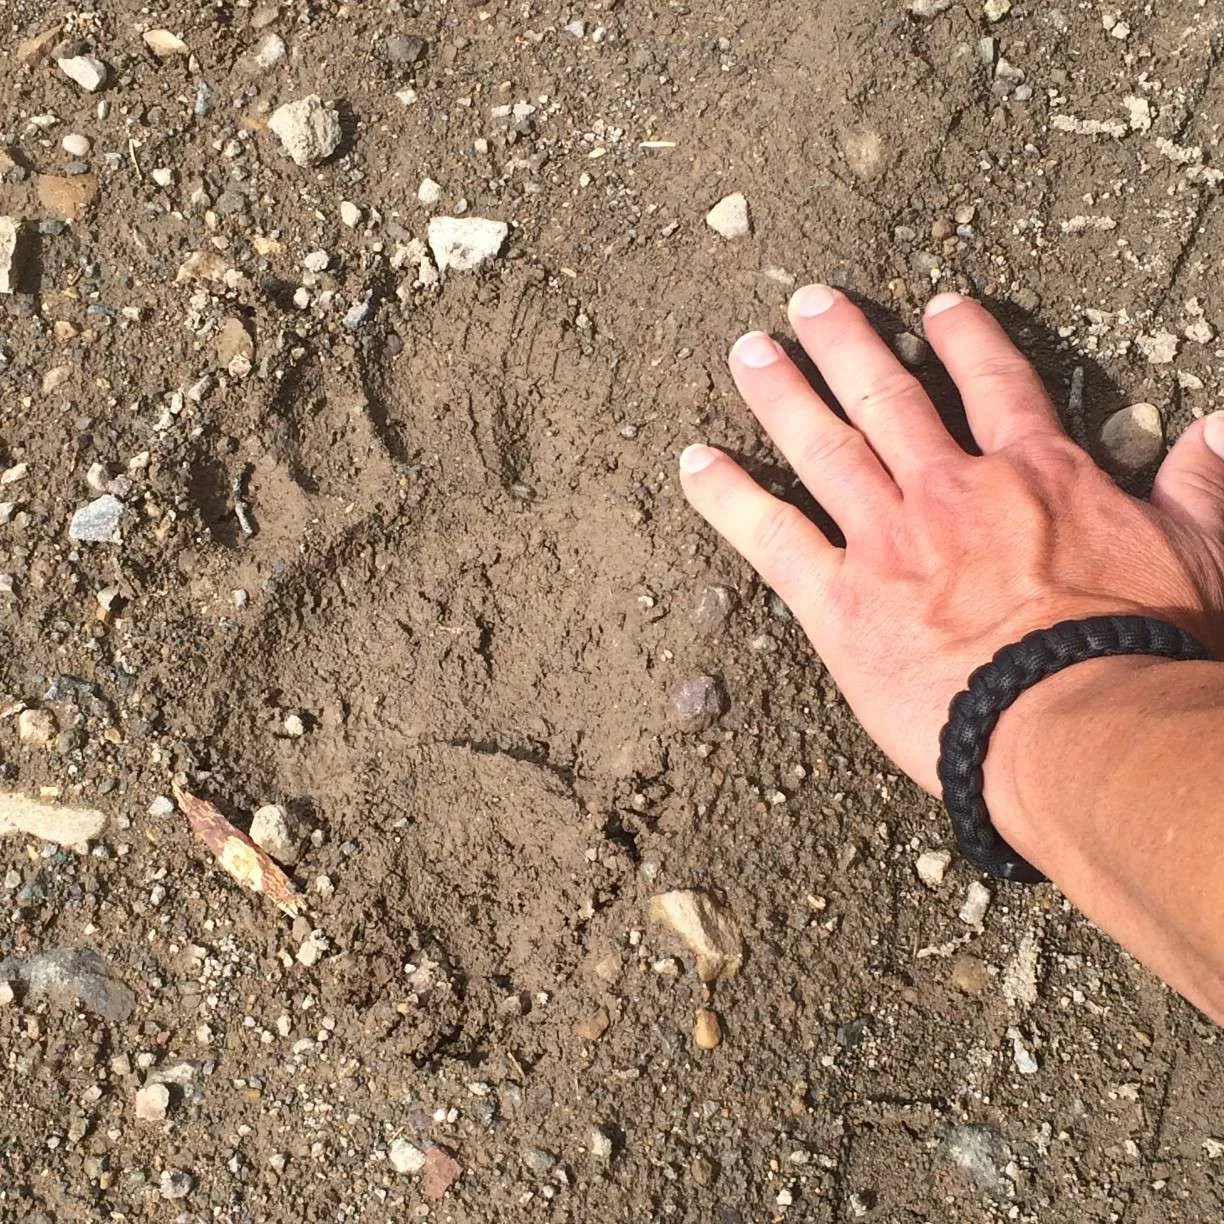 Mans hand next to bear print in mud.